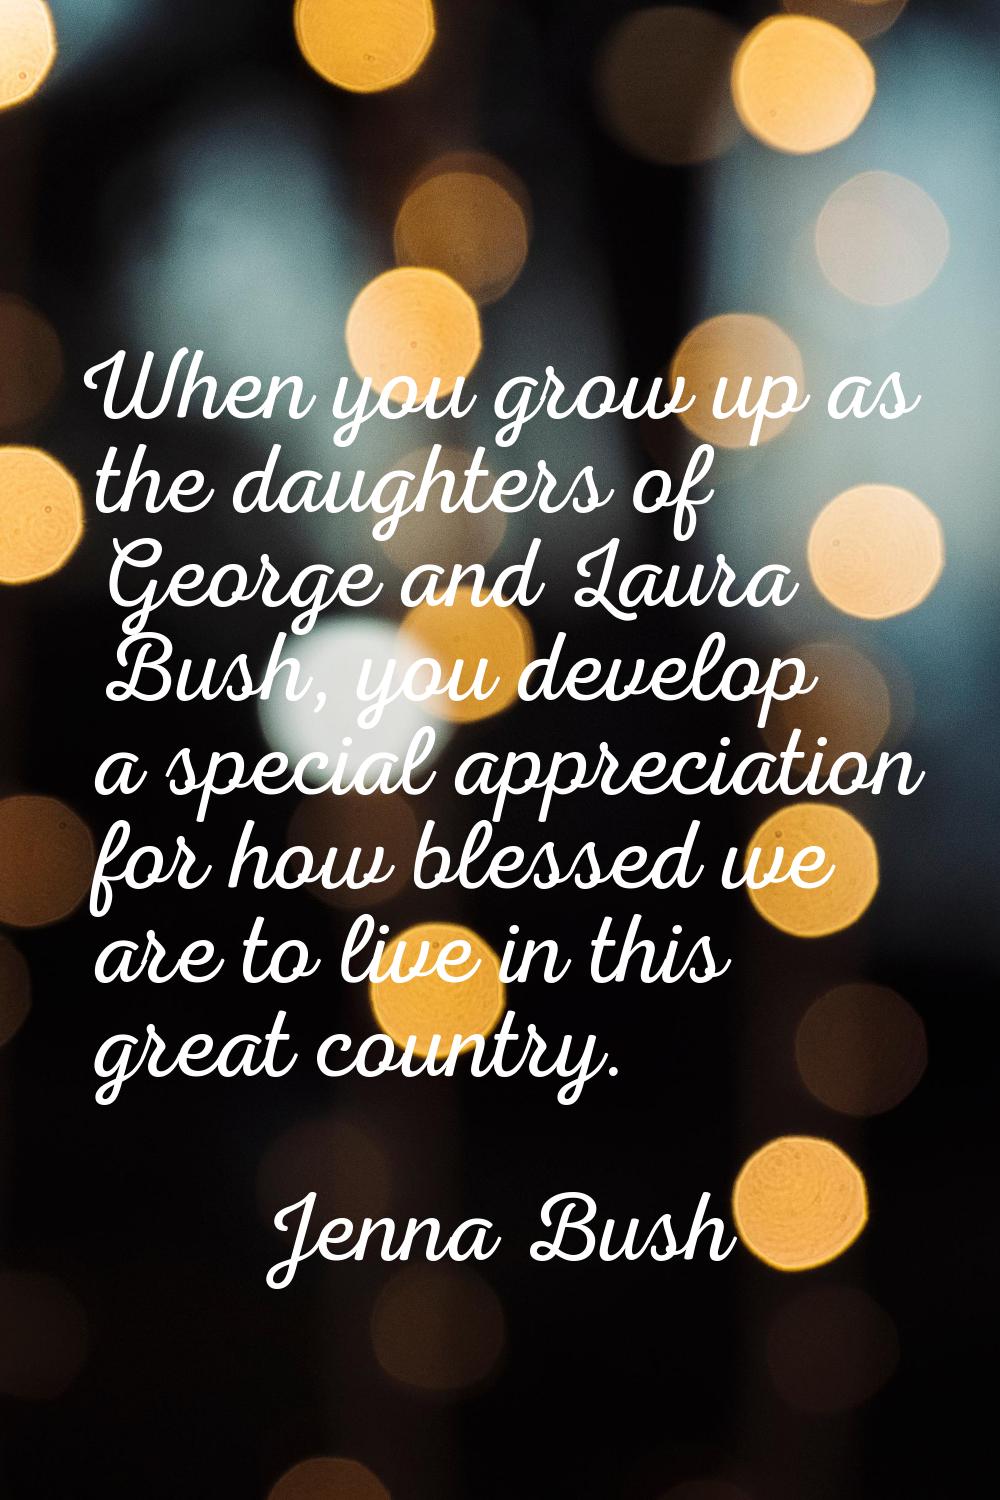 When you grow up as the daughters of George and Laura Bush, you develop a special appreciation for 